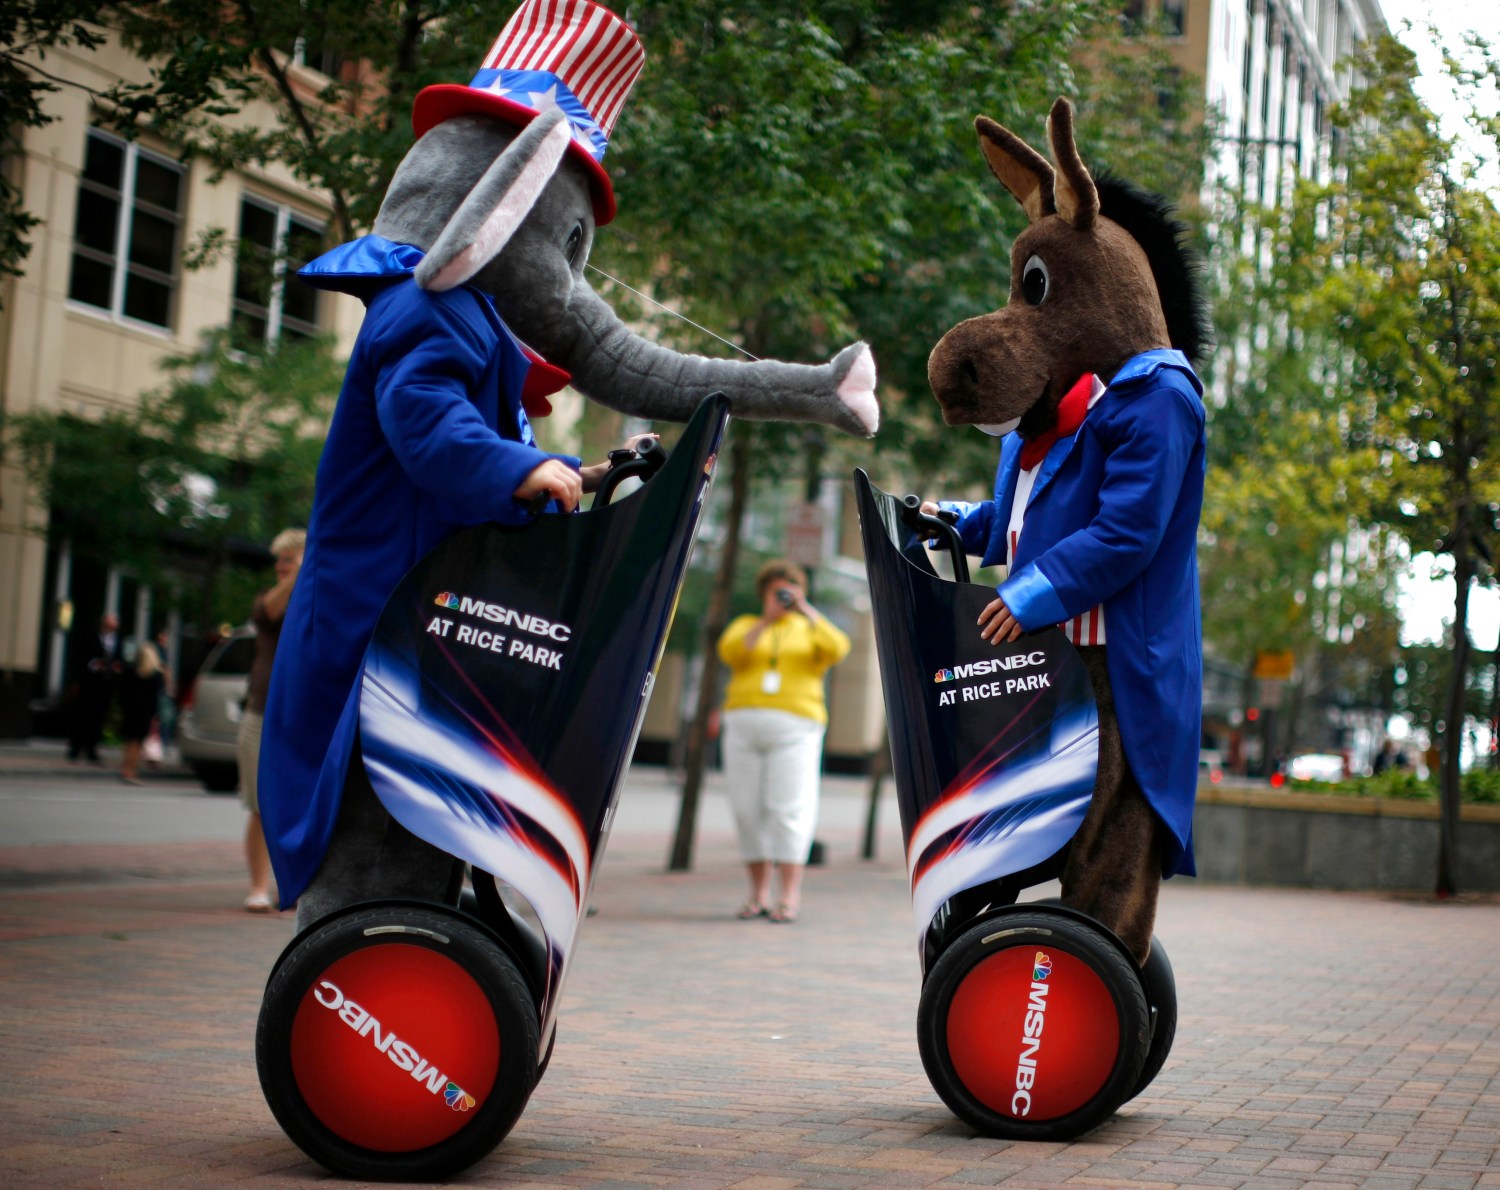 Mascots representing the Republican party (L) and the Democratic party (R) ride around on Segway personal transporters at the 2008 Republican National Convention in St. Paul, Minnesota September 2, 2008. REUTERS/Jim Young (UNITED STATES) US PRESIDENTIAL ELECTION CAMPAIGN 2008 (USA)